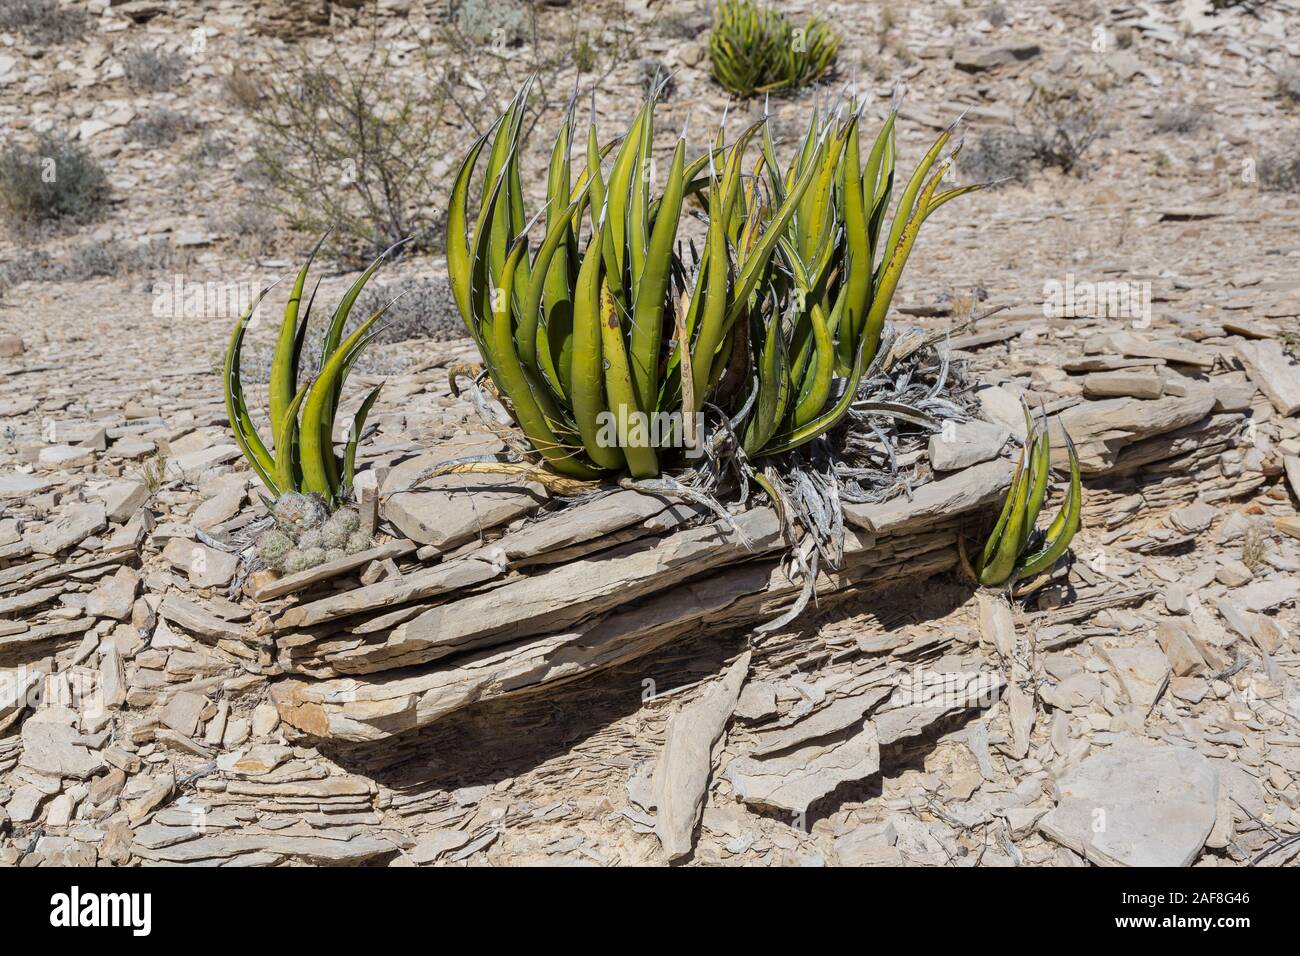 Big Bend National park, Texas. Agave lechuguilla, in Chihuahuan Desert Environment. Stock Photo